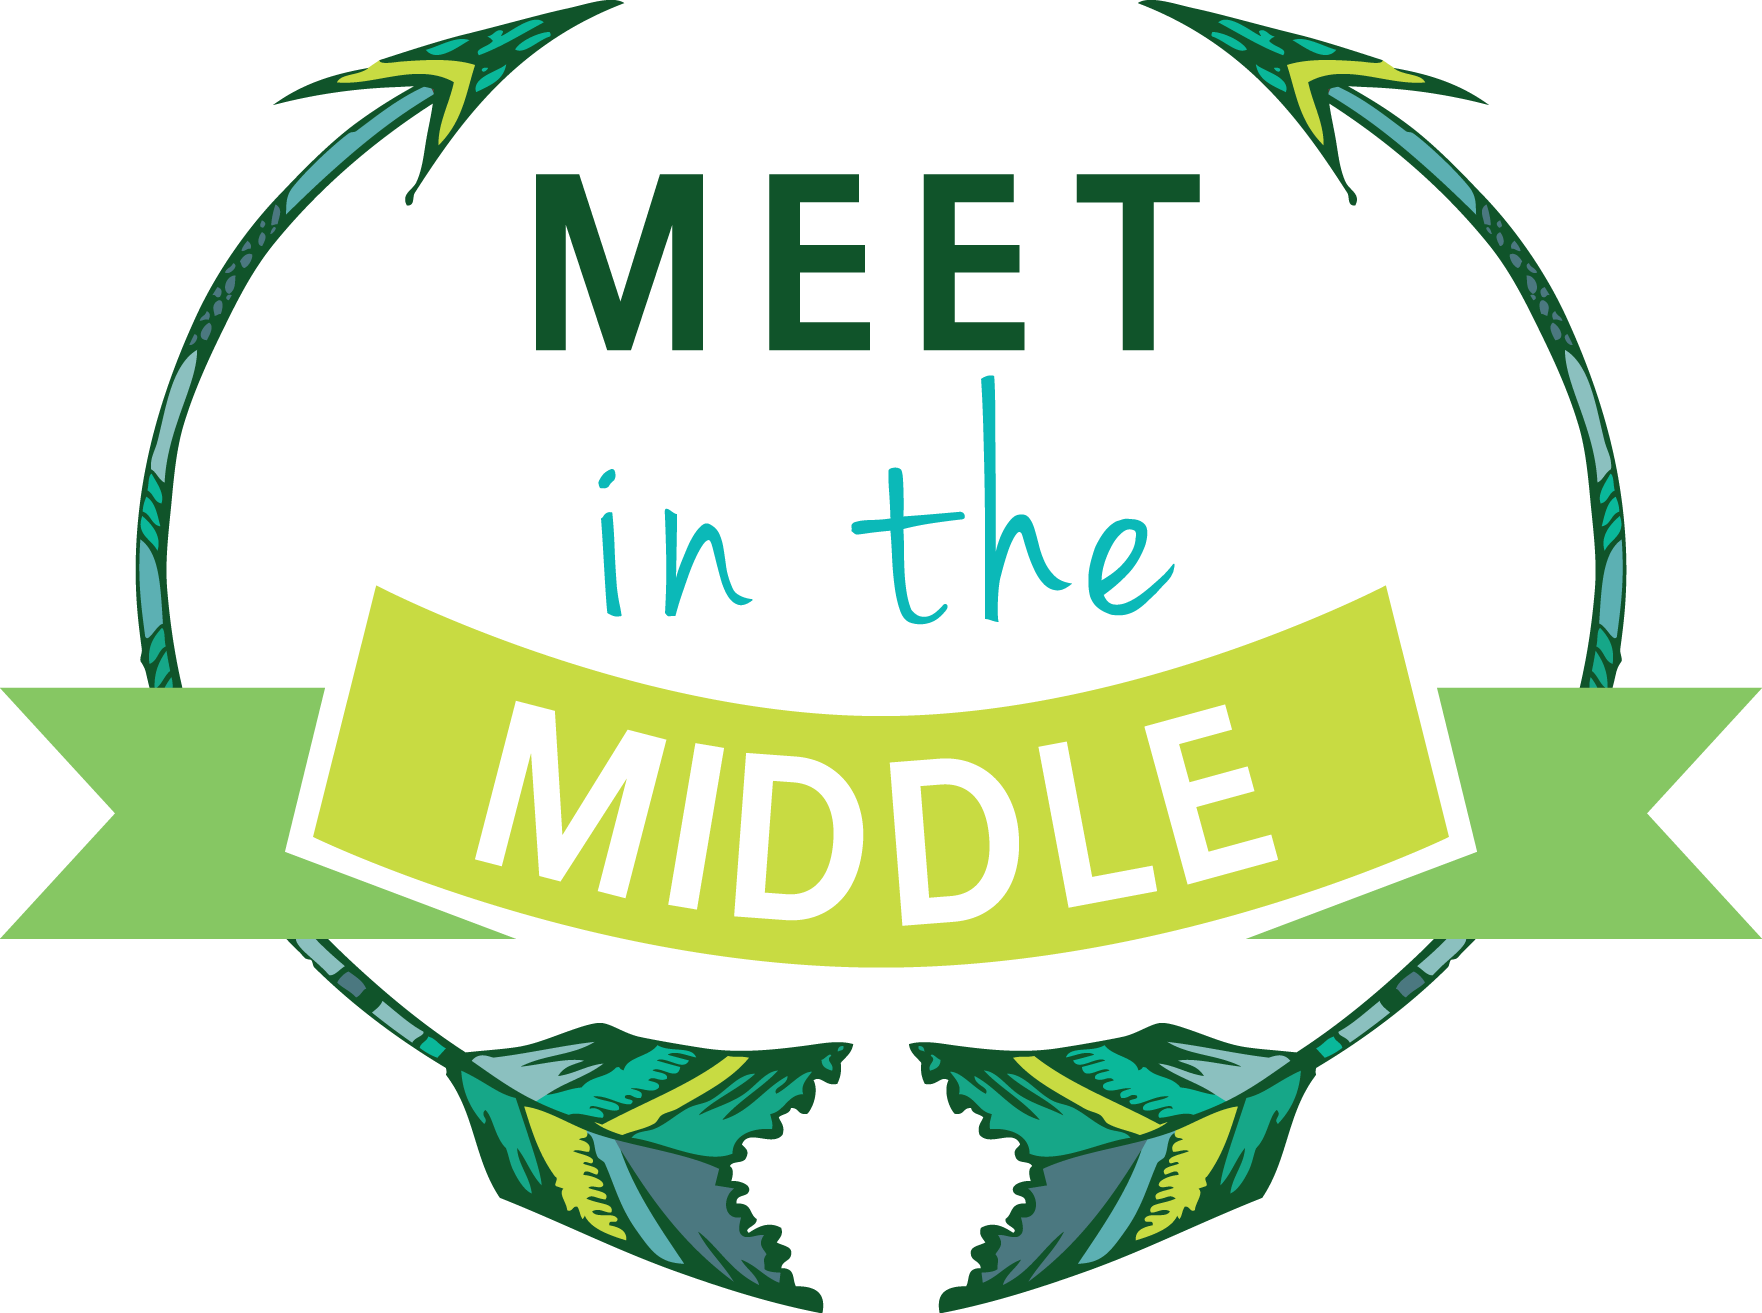 Meet In The Middle - Meet In The Middle (1762x1313)